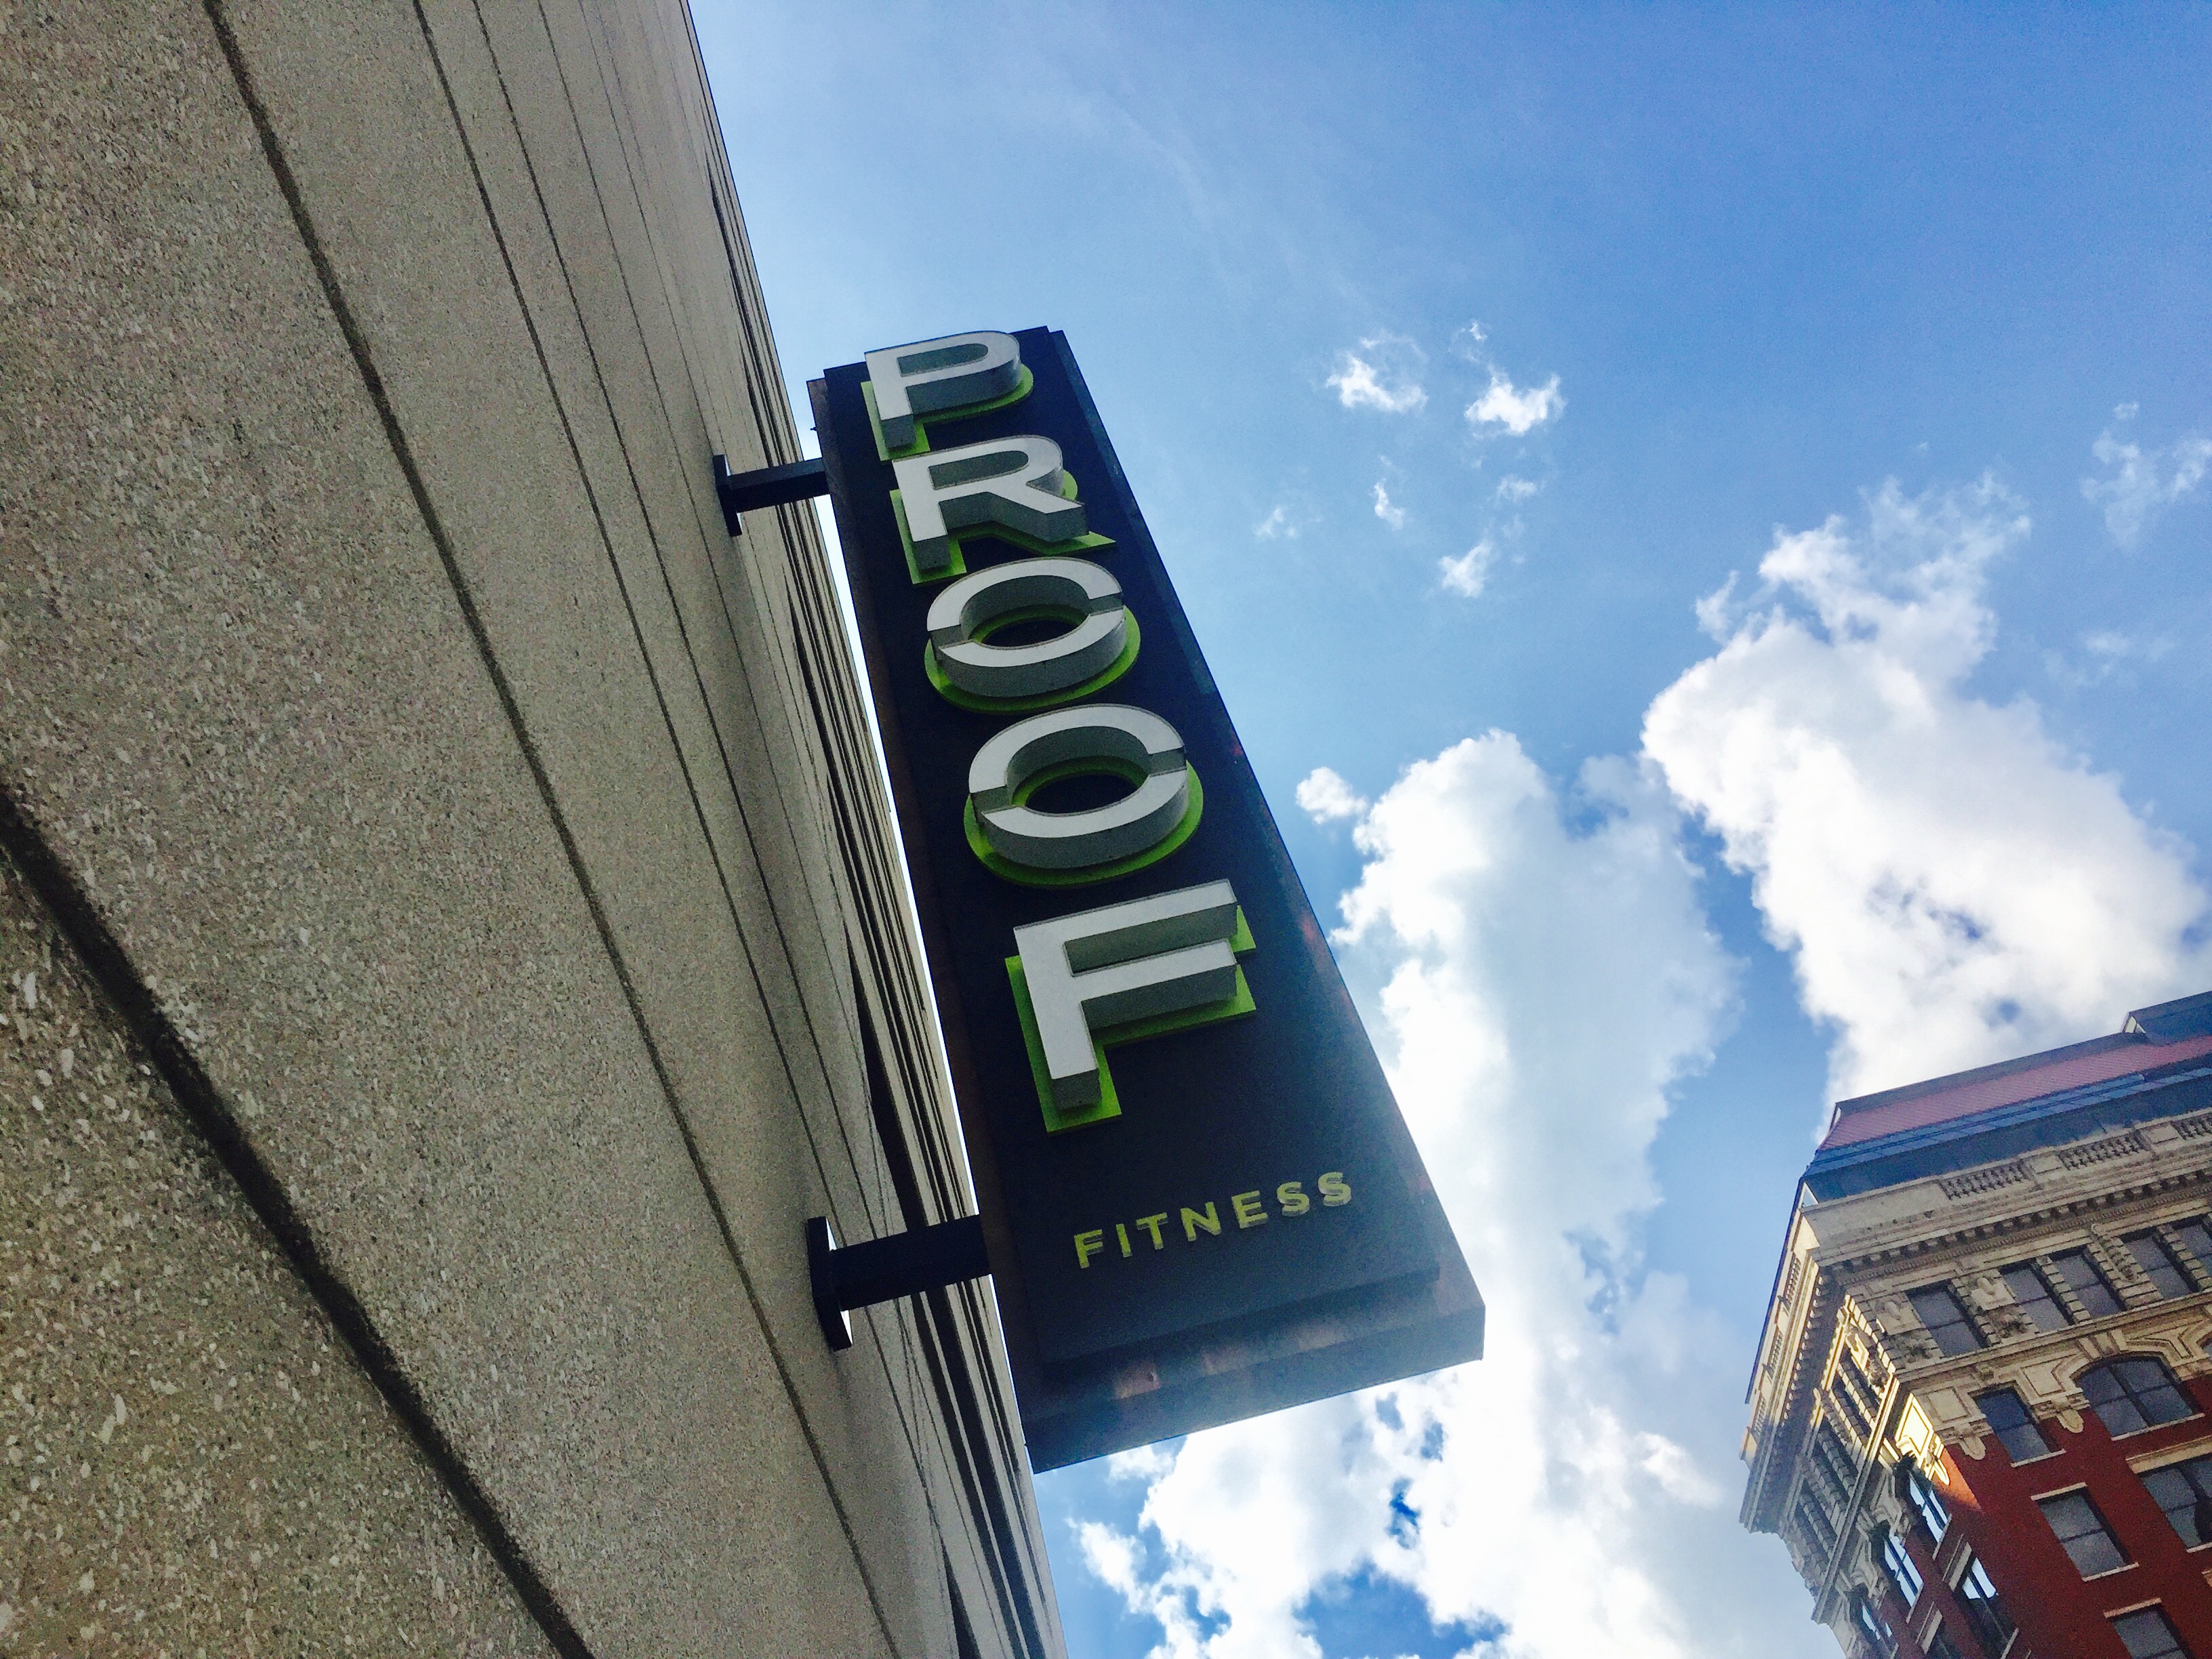 Proof Fitness located in downtown Lexington provides world-class facilities with a five-star concierge service.